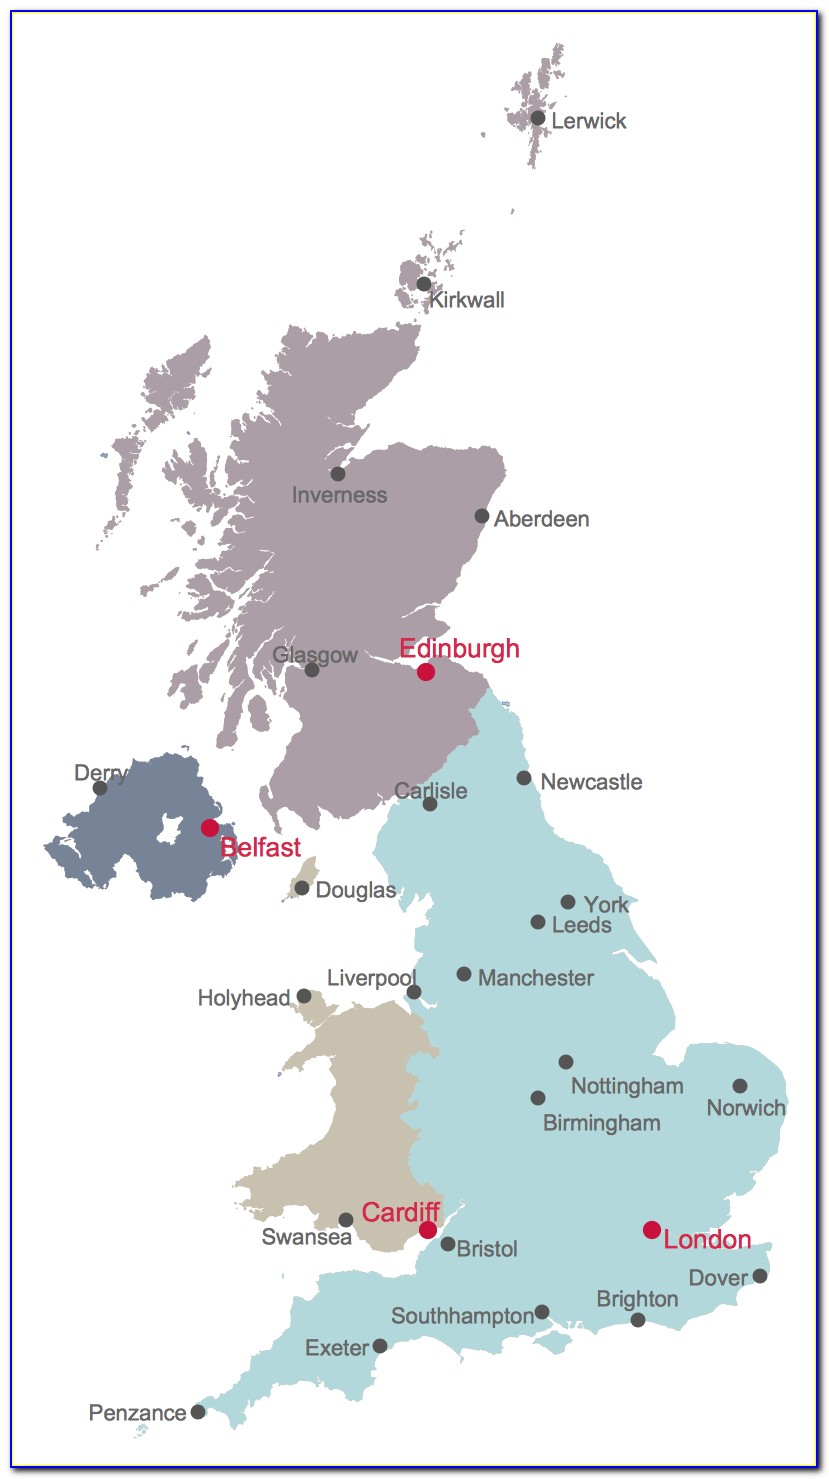 Map Of British Isles Showing Cities